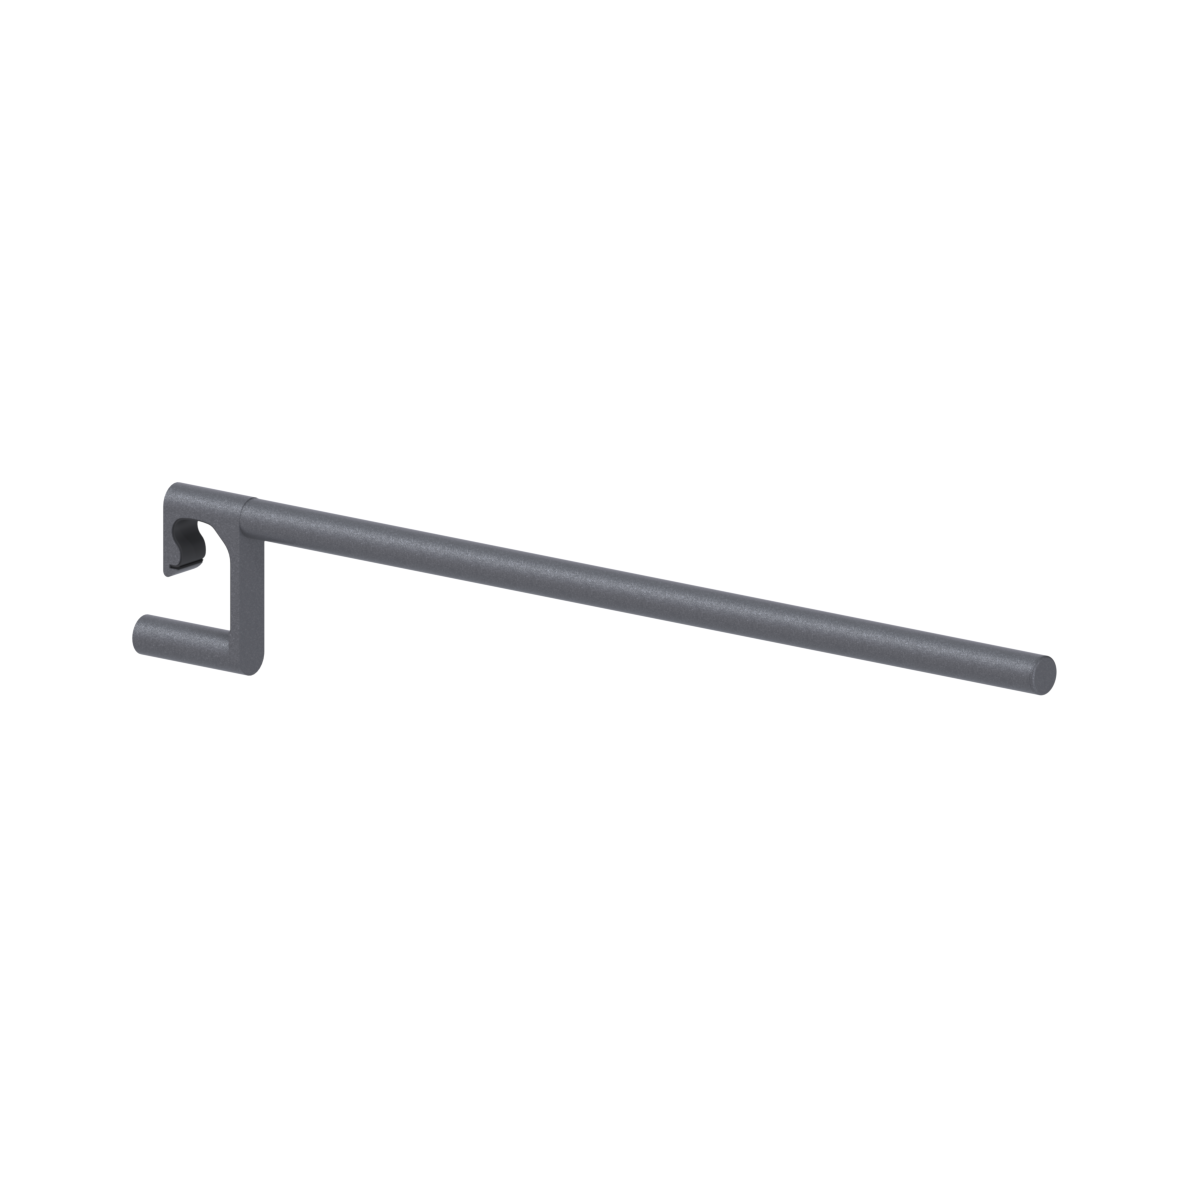 Cavere Care Shower guard rail, for hanging in, L = 845 mm, Cavere Metallic anthracite